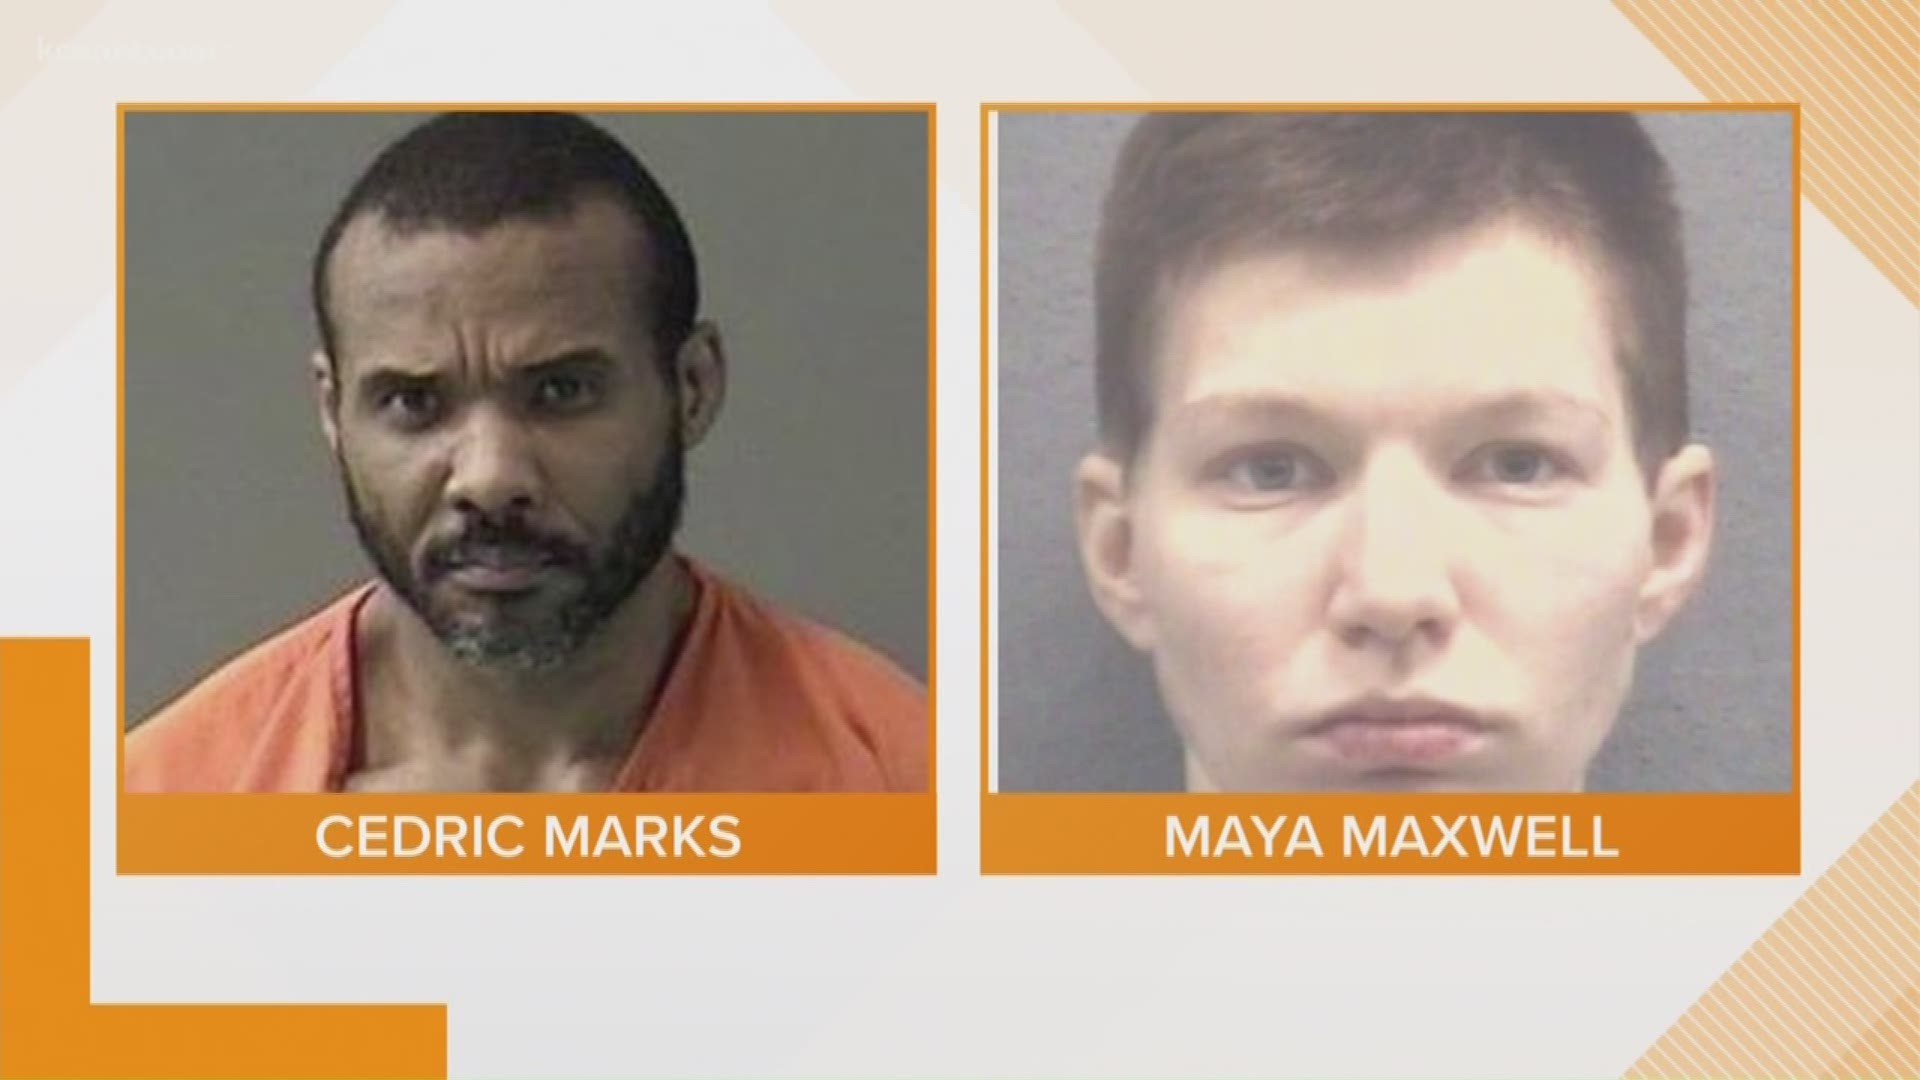 Cedric Marks and Maya Maxwell are accused of killing Marks' ex-girlfriend and her friend before dumping their bodies in rural Oklahoma.